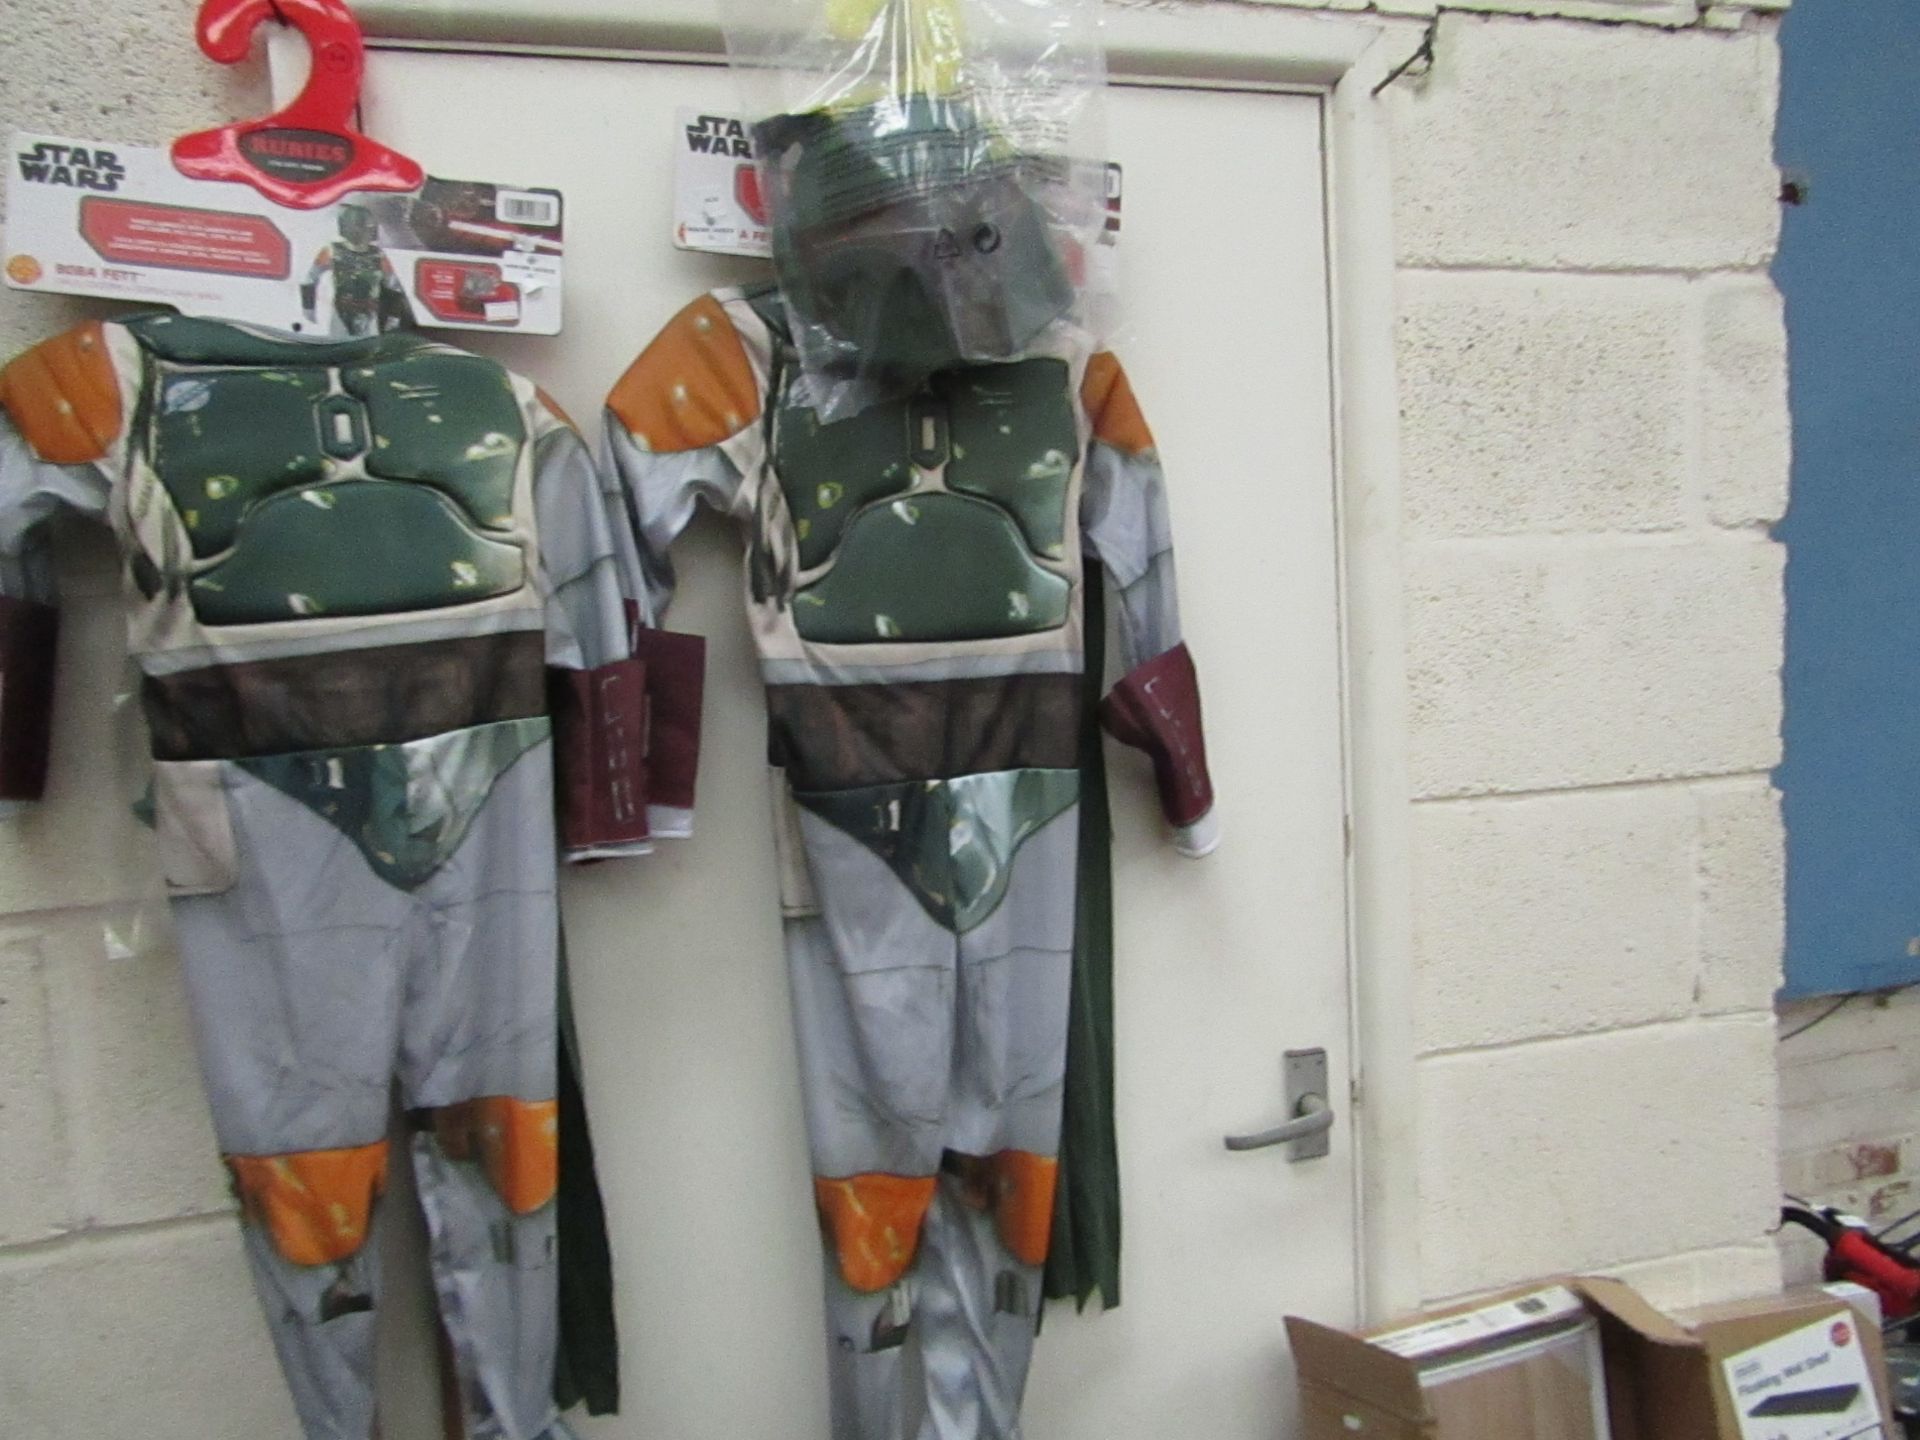 Rubies Disney - Star Wars Boba Fett Costume ( Size 5-6 Years ) - Good Condition with tags